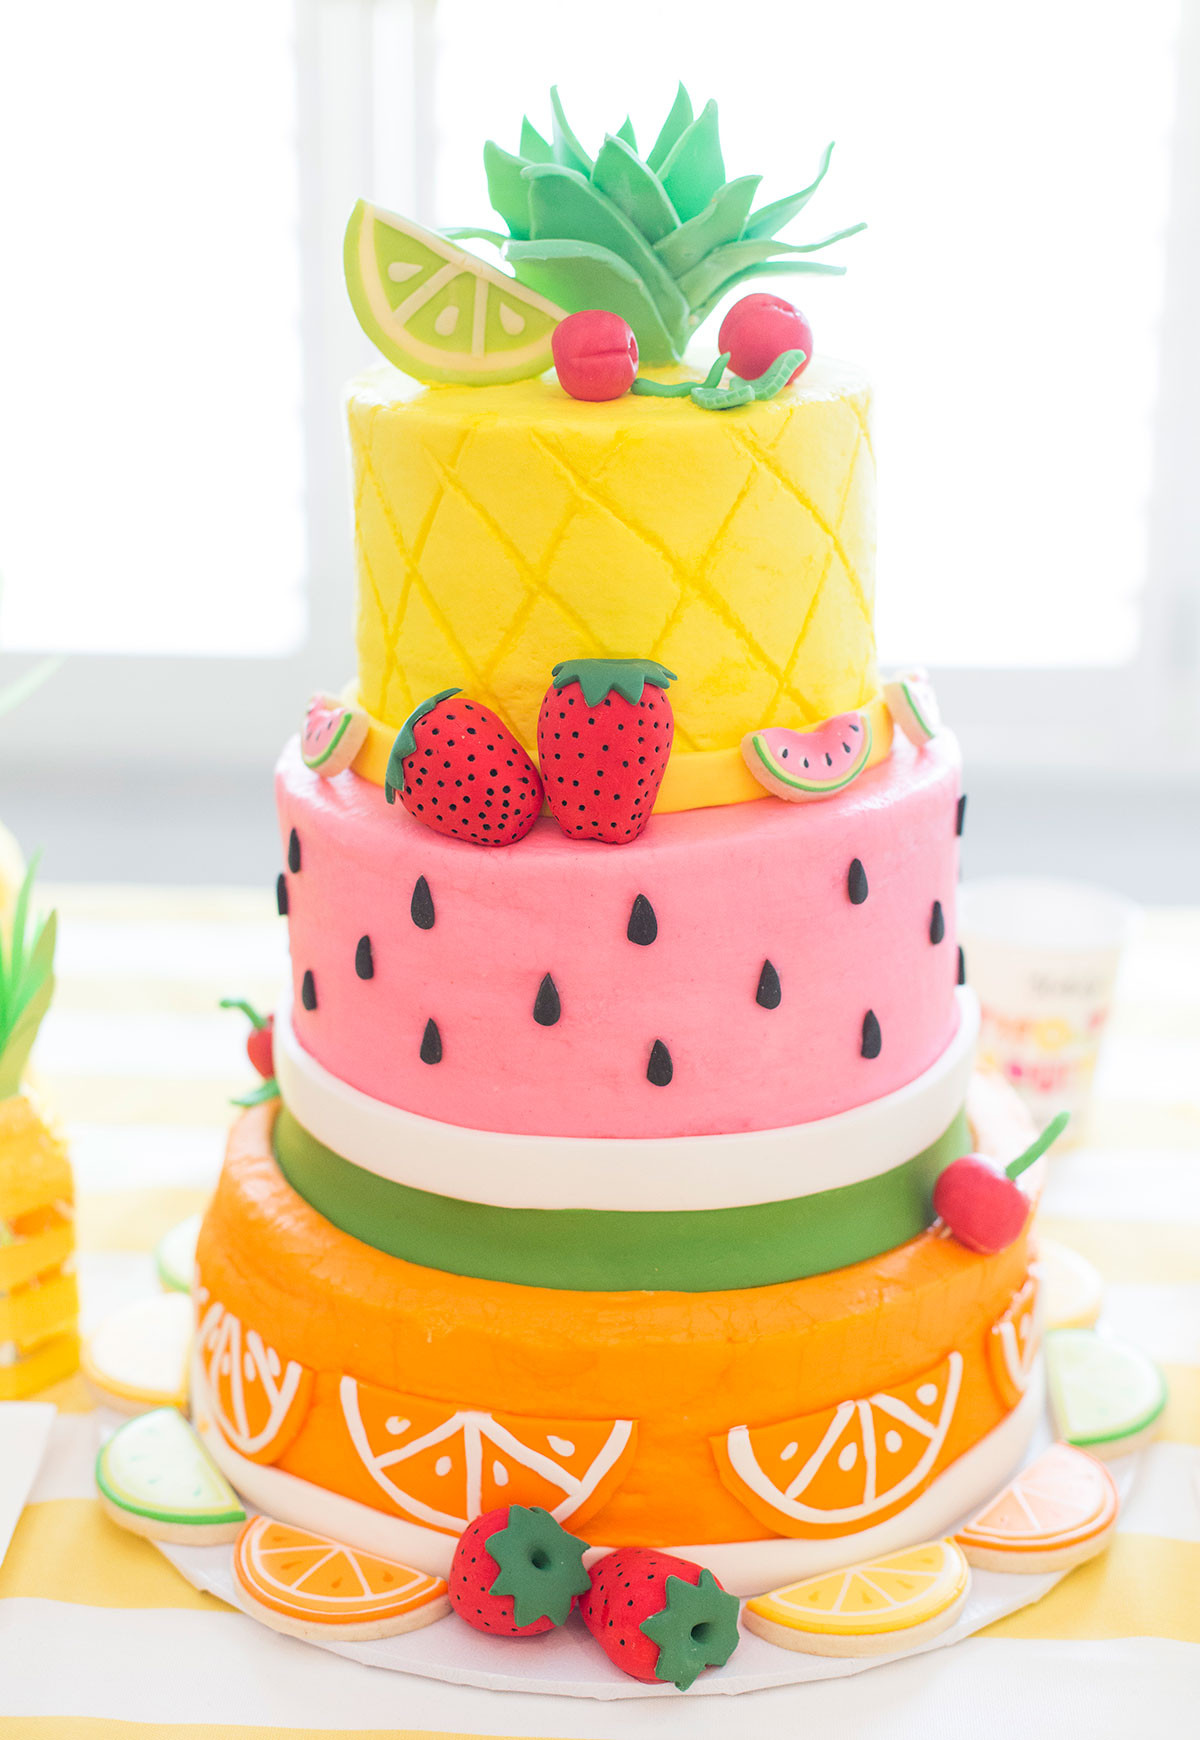 Cute Birthday Cake Ideas
 Roundup of the BEST Summer Cakes Tutorials and Ideas